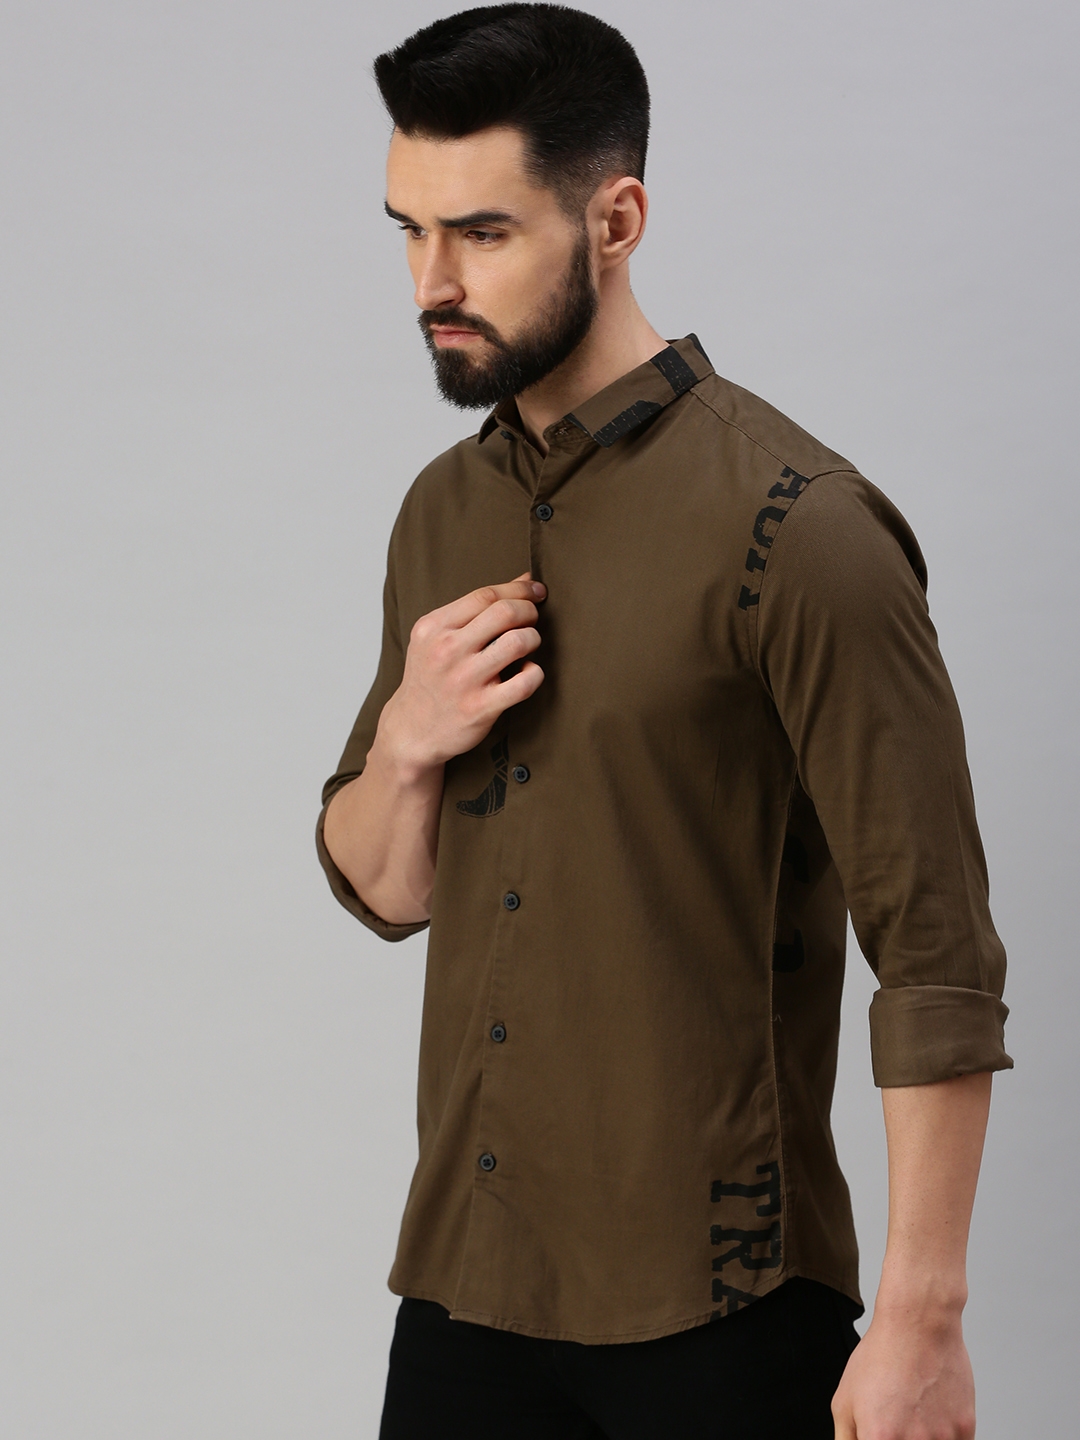 Showoff | SHOWOFF Men Coffee Brown Printed Spread Collar Full Sleeves Casual Shirt 2